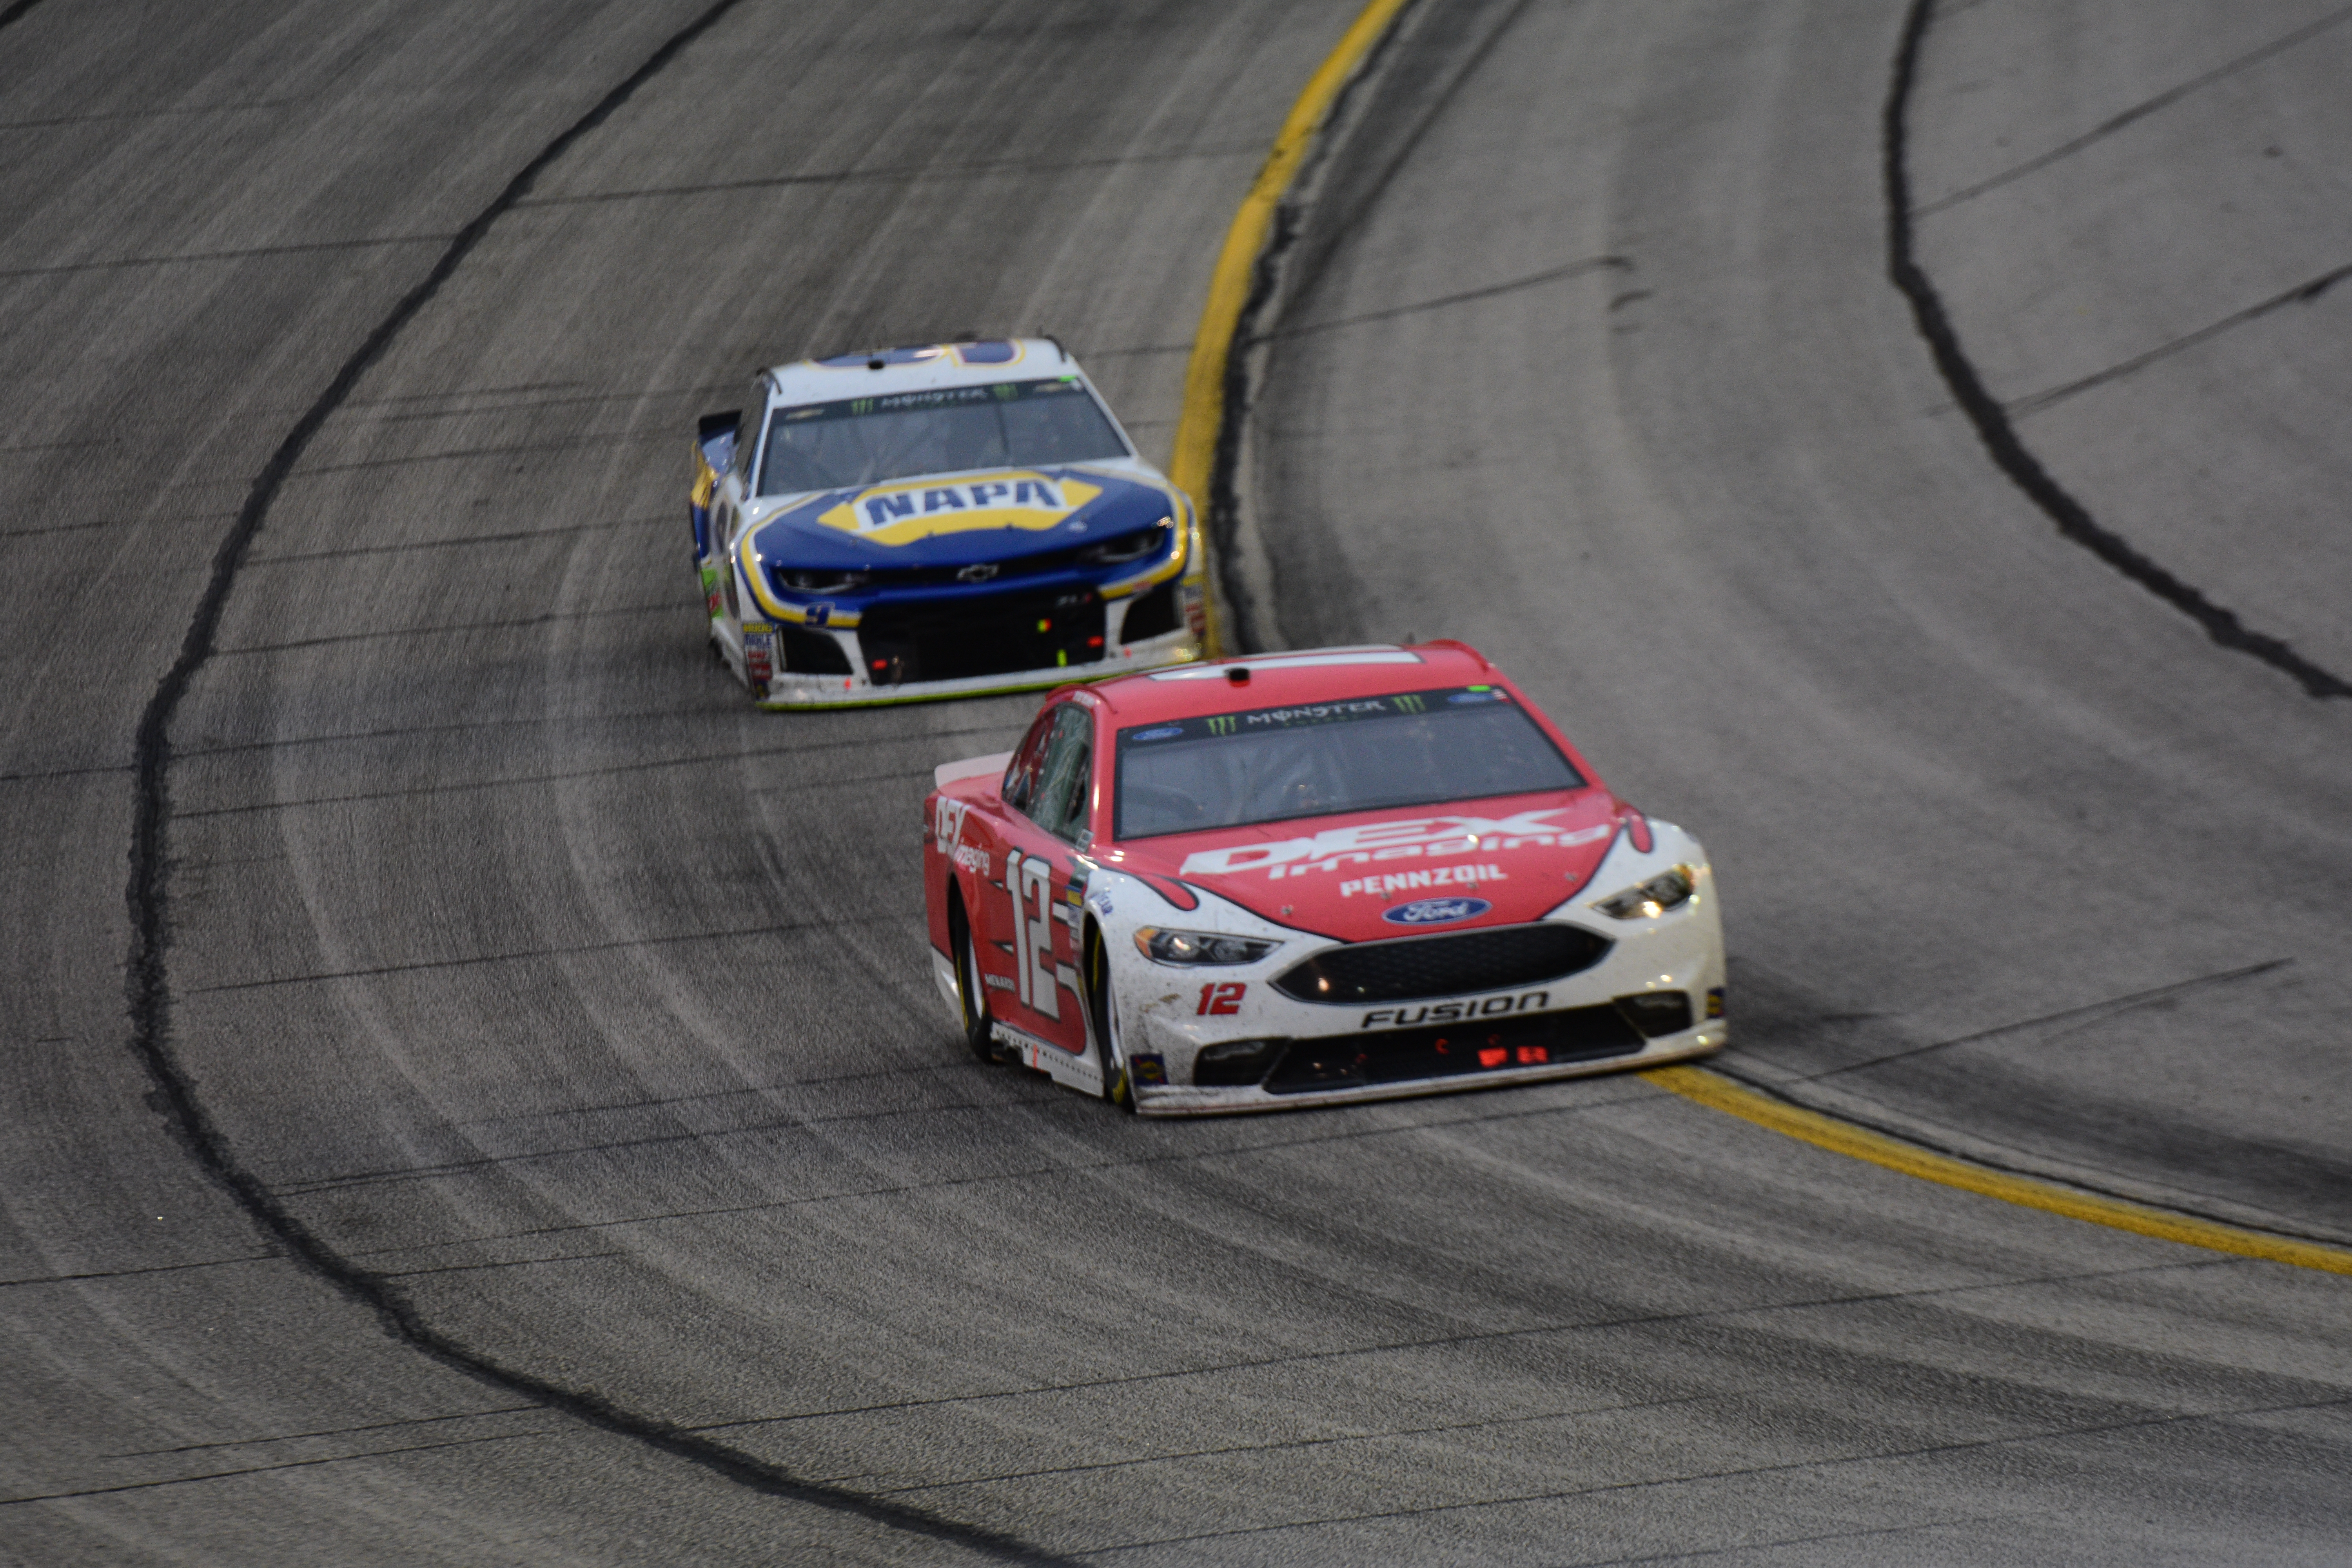 Will we see a battle between young guns like Ryan Blaney and Chase Elliott during the West Coast Swing? (Photo Credit: Zach Darrow/TPF)